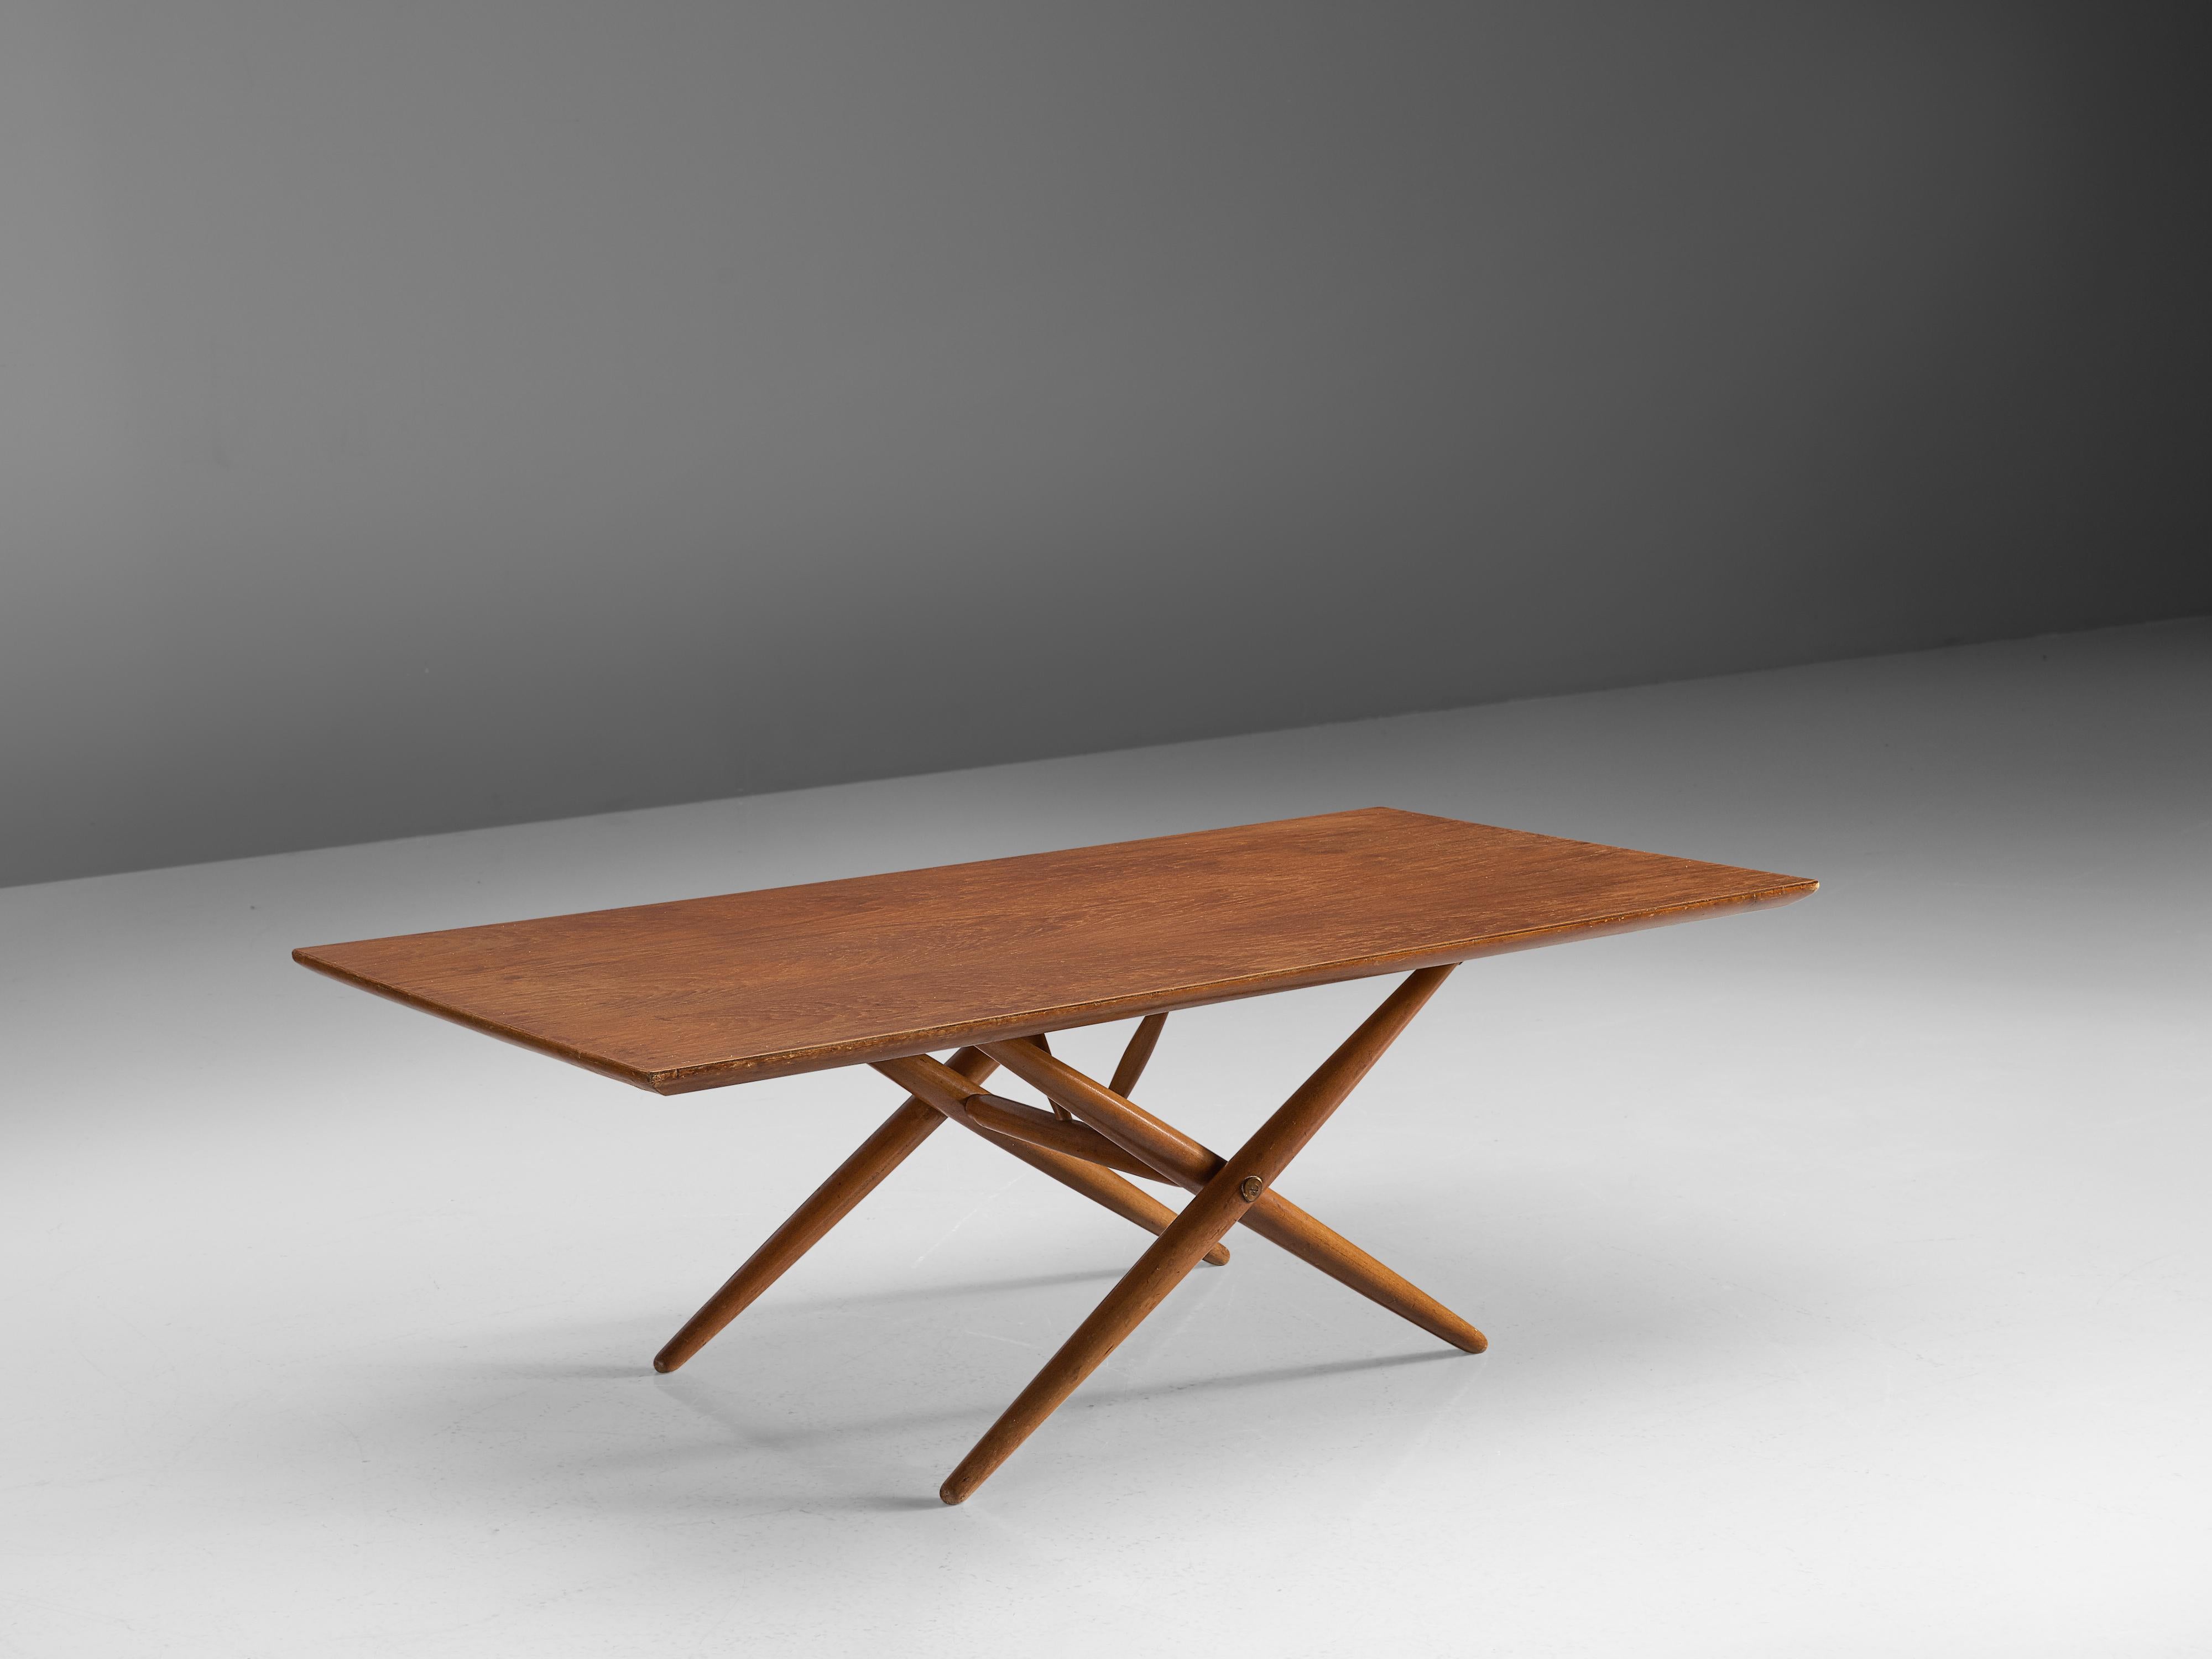 Ilmari Tapiovaara for Asko, 'Domino' coffee table, teak, birch, Finland, 1954.

This Finnish coffee table is designed by Ilmari Tapiovaara. The table features a solid rectangular tabletop and a cross-legged base with legs that are tapered towards